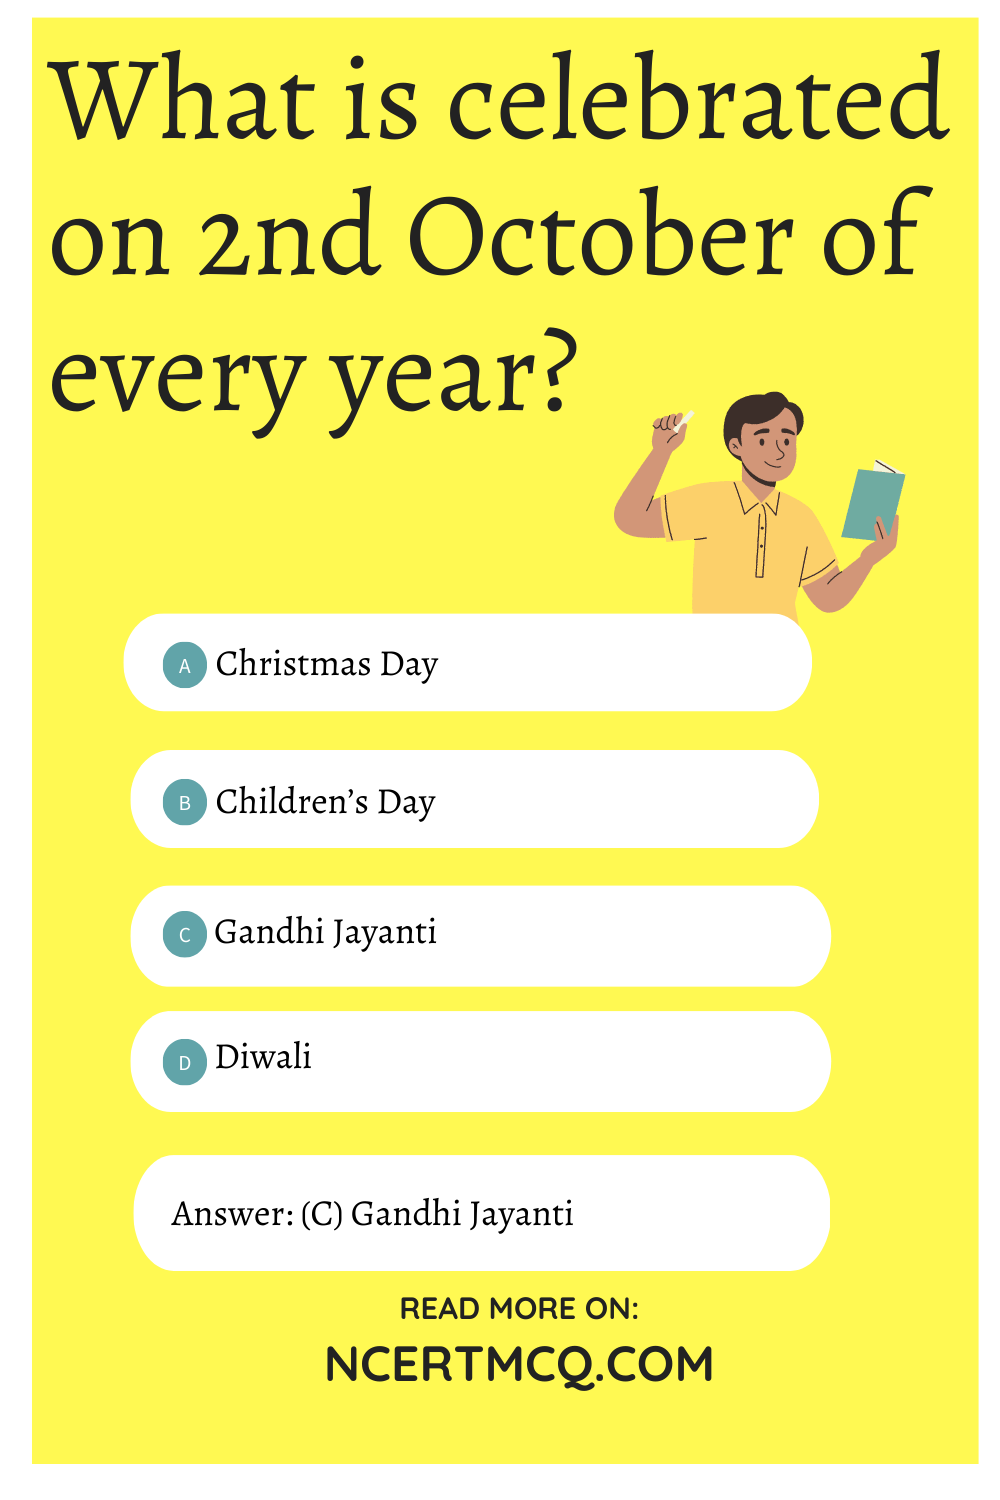 What is celebrated on 2nd October of every year?